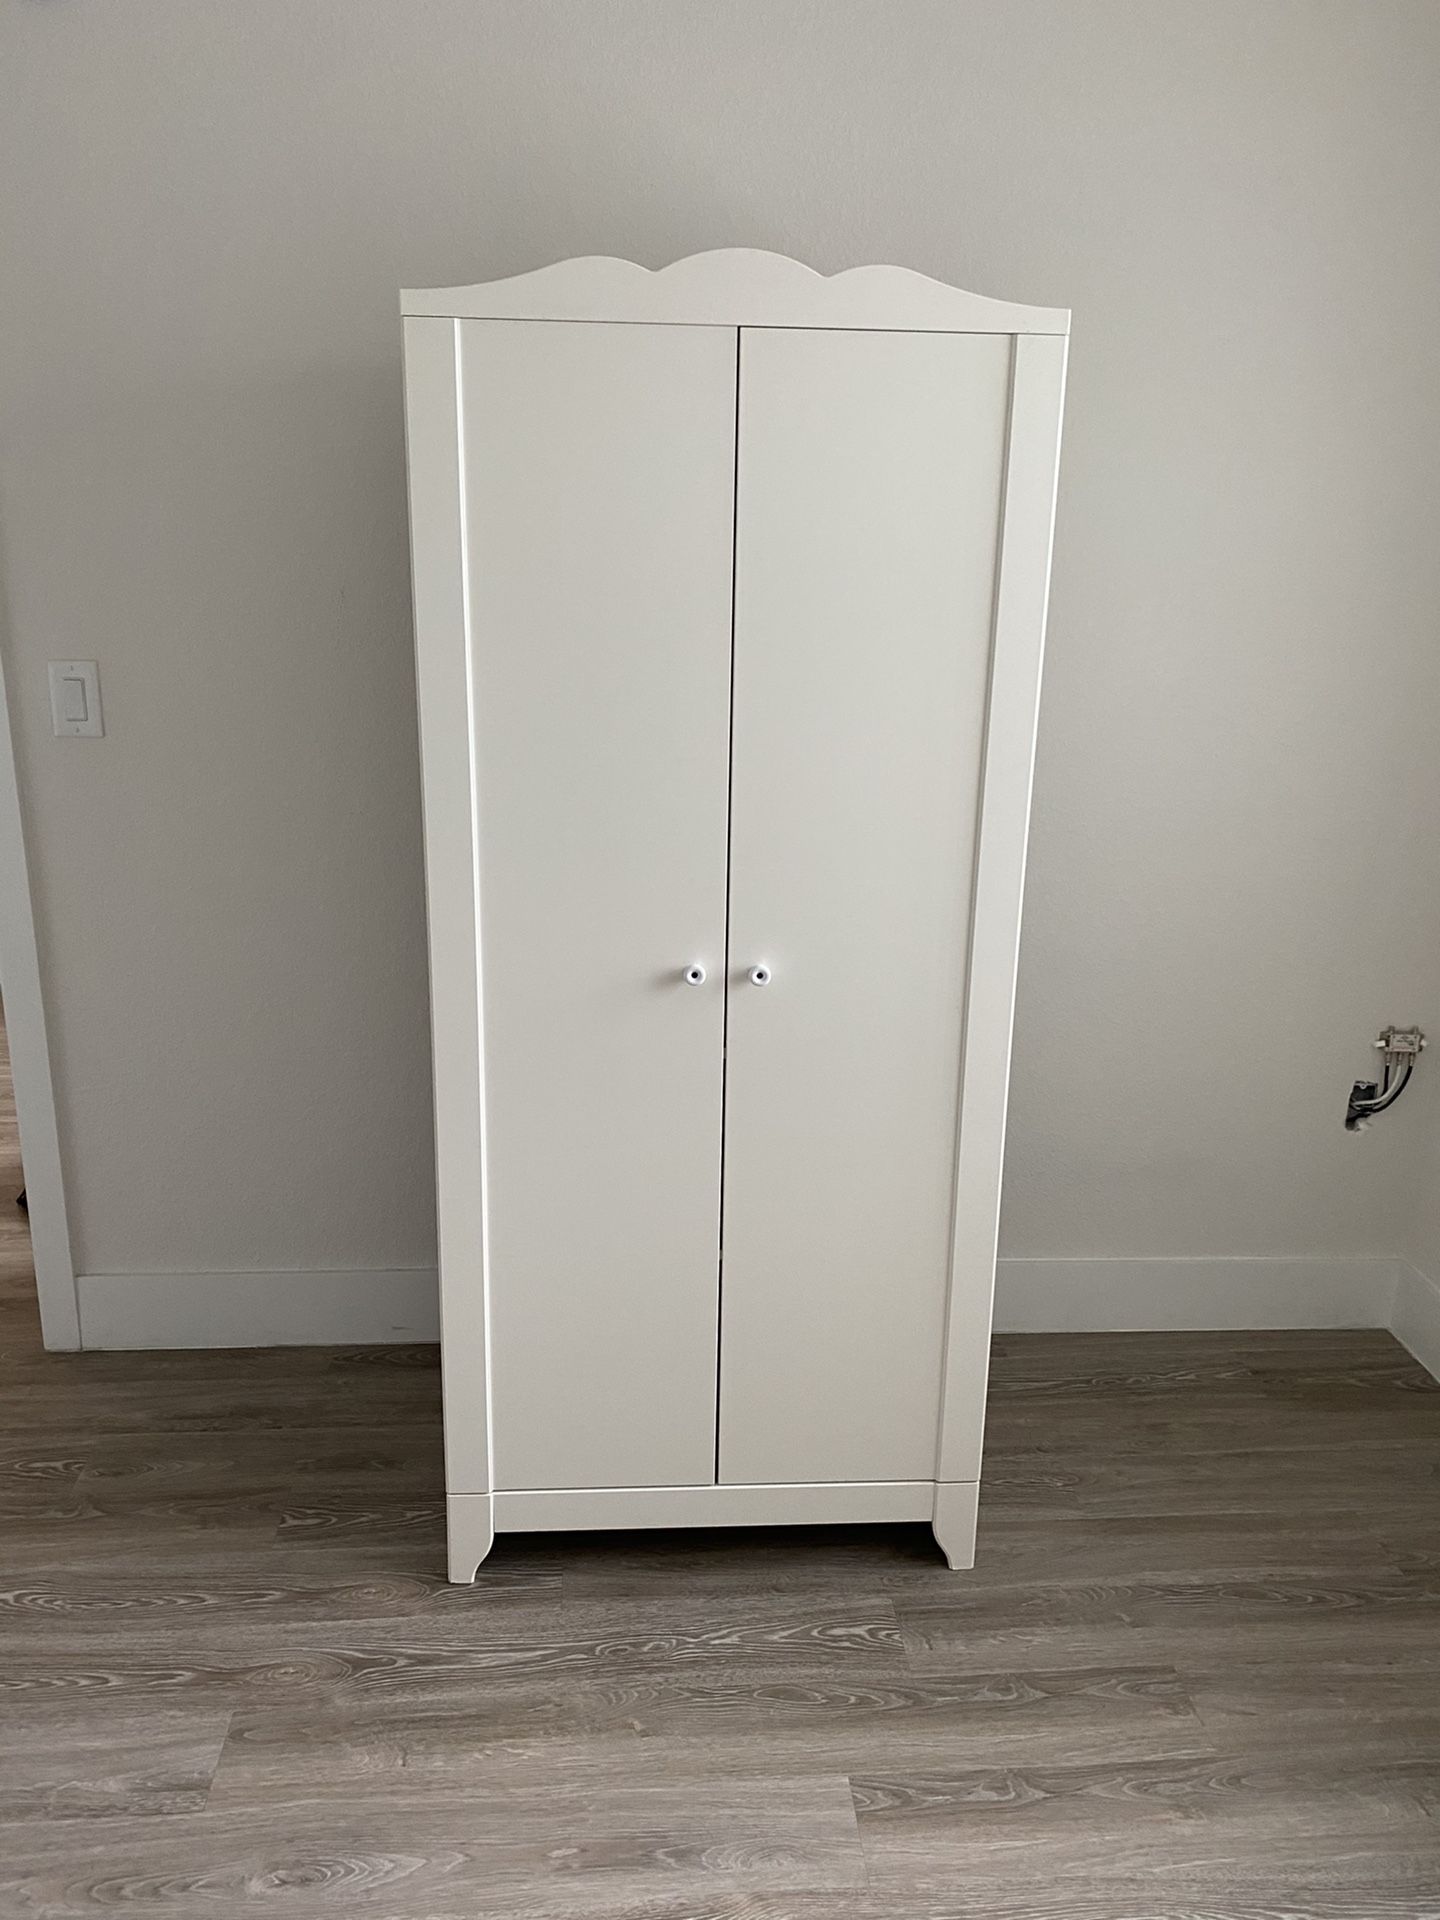 Dresser for clothes shoes etc. in great condition